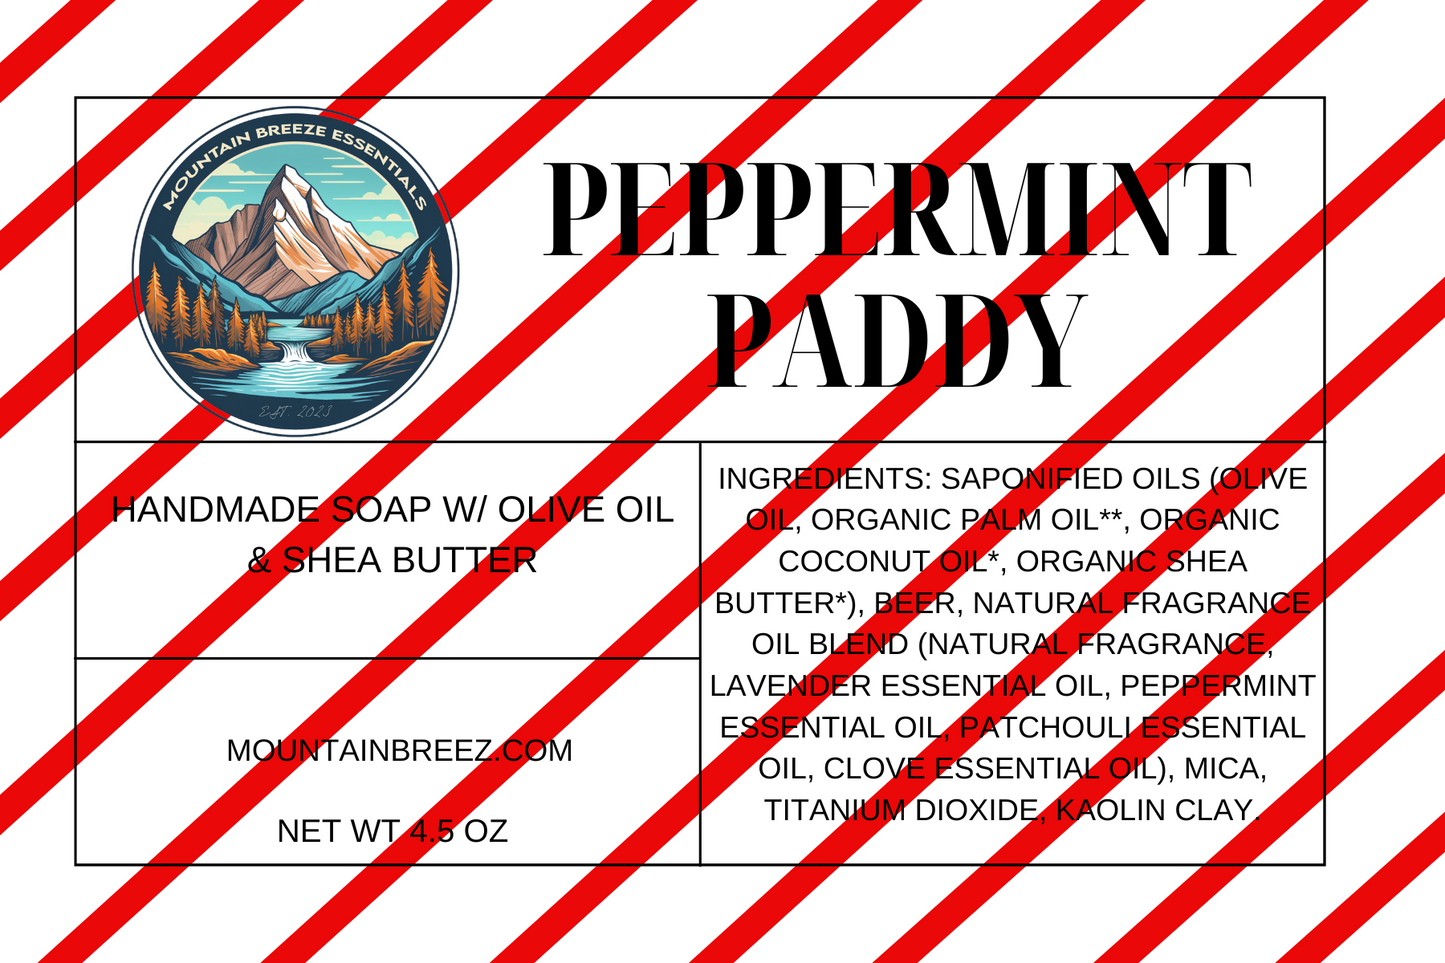 Peppermint Paddy - Cold Pressed Bar Soap